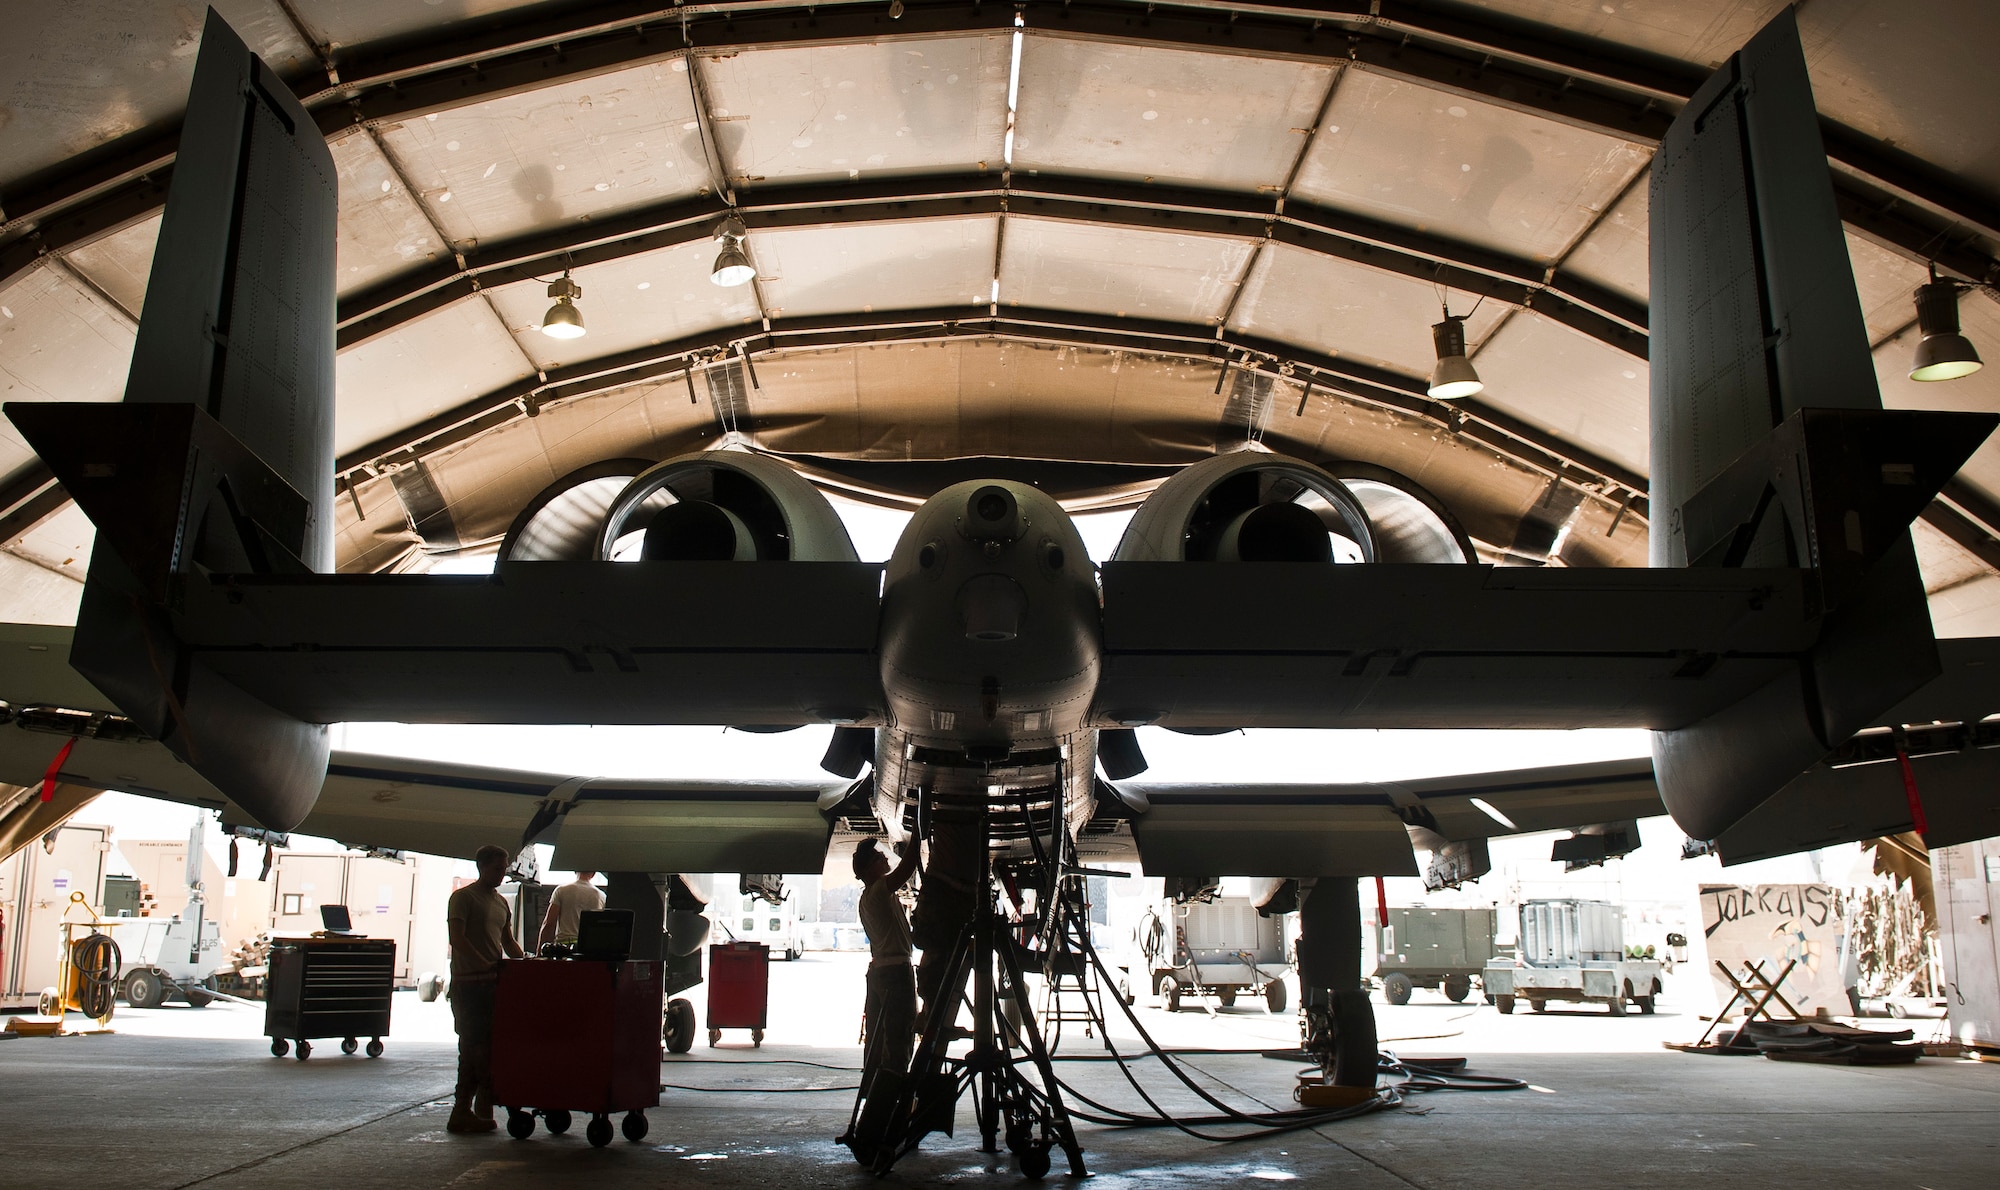 Maintainers with the 455th Expeditionary Maintenance Squadron work on a U.S. Air Force A-10 Thunderbolt II during phase maintenance at Bagram Airfield, Afghanistan, August 9, 2012. Deployed Aircraft endure increased flight hours and more combat maneuvers, which increases the need for routine maintenance and inspections. (U.S. Air Force Photo/Capt. Raymond Geoffroy)